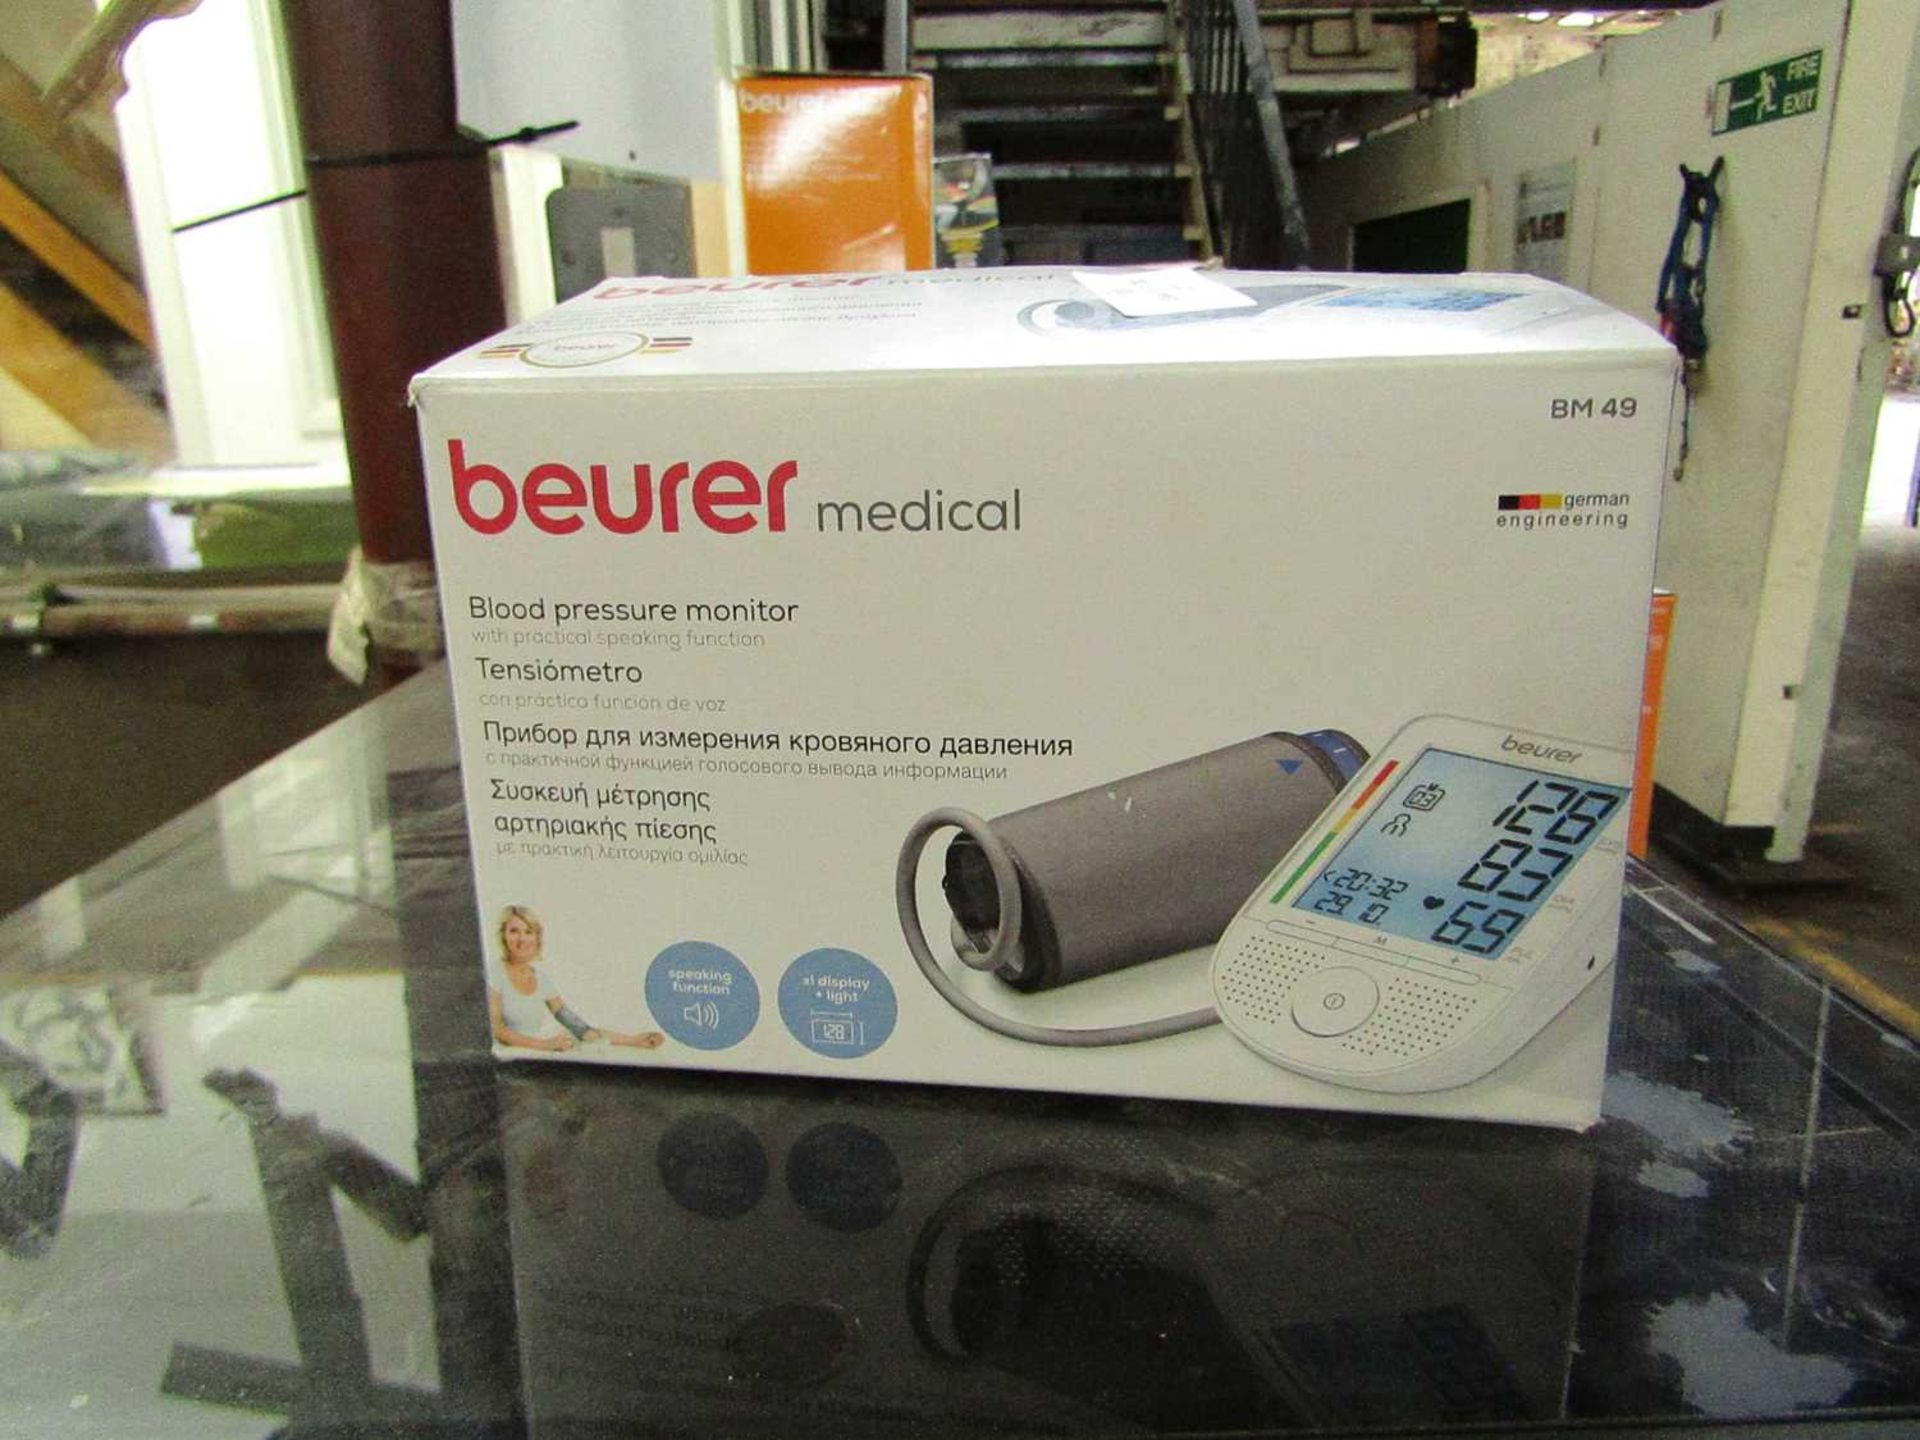 1x Beurer Medical Upper Arm Blood Pressure Monitor BM49 - This item is graded B - RRP £50